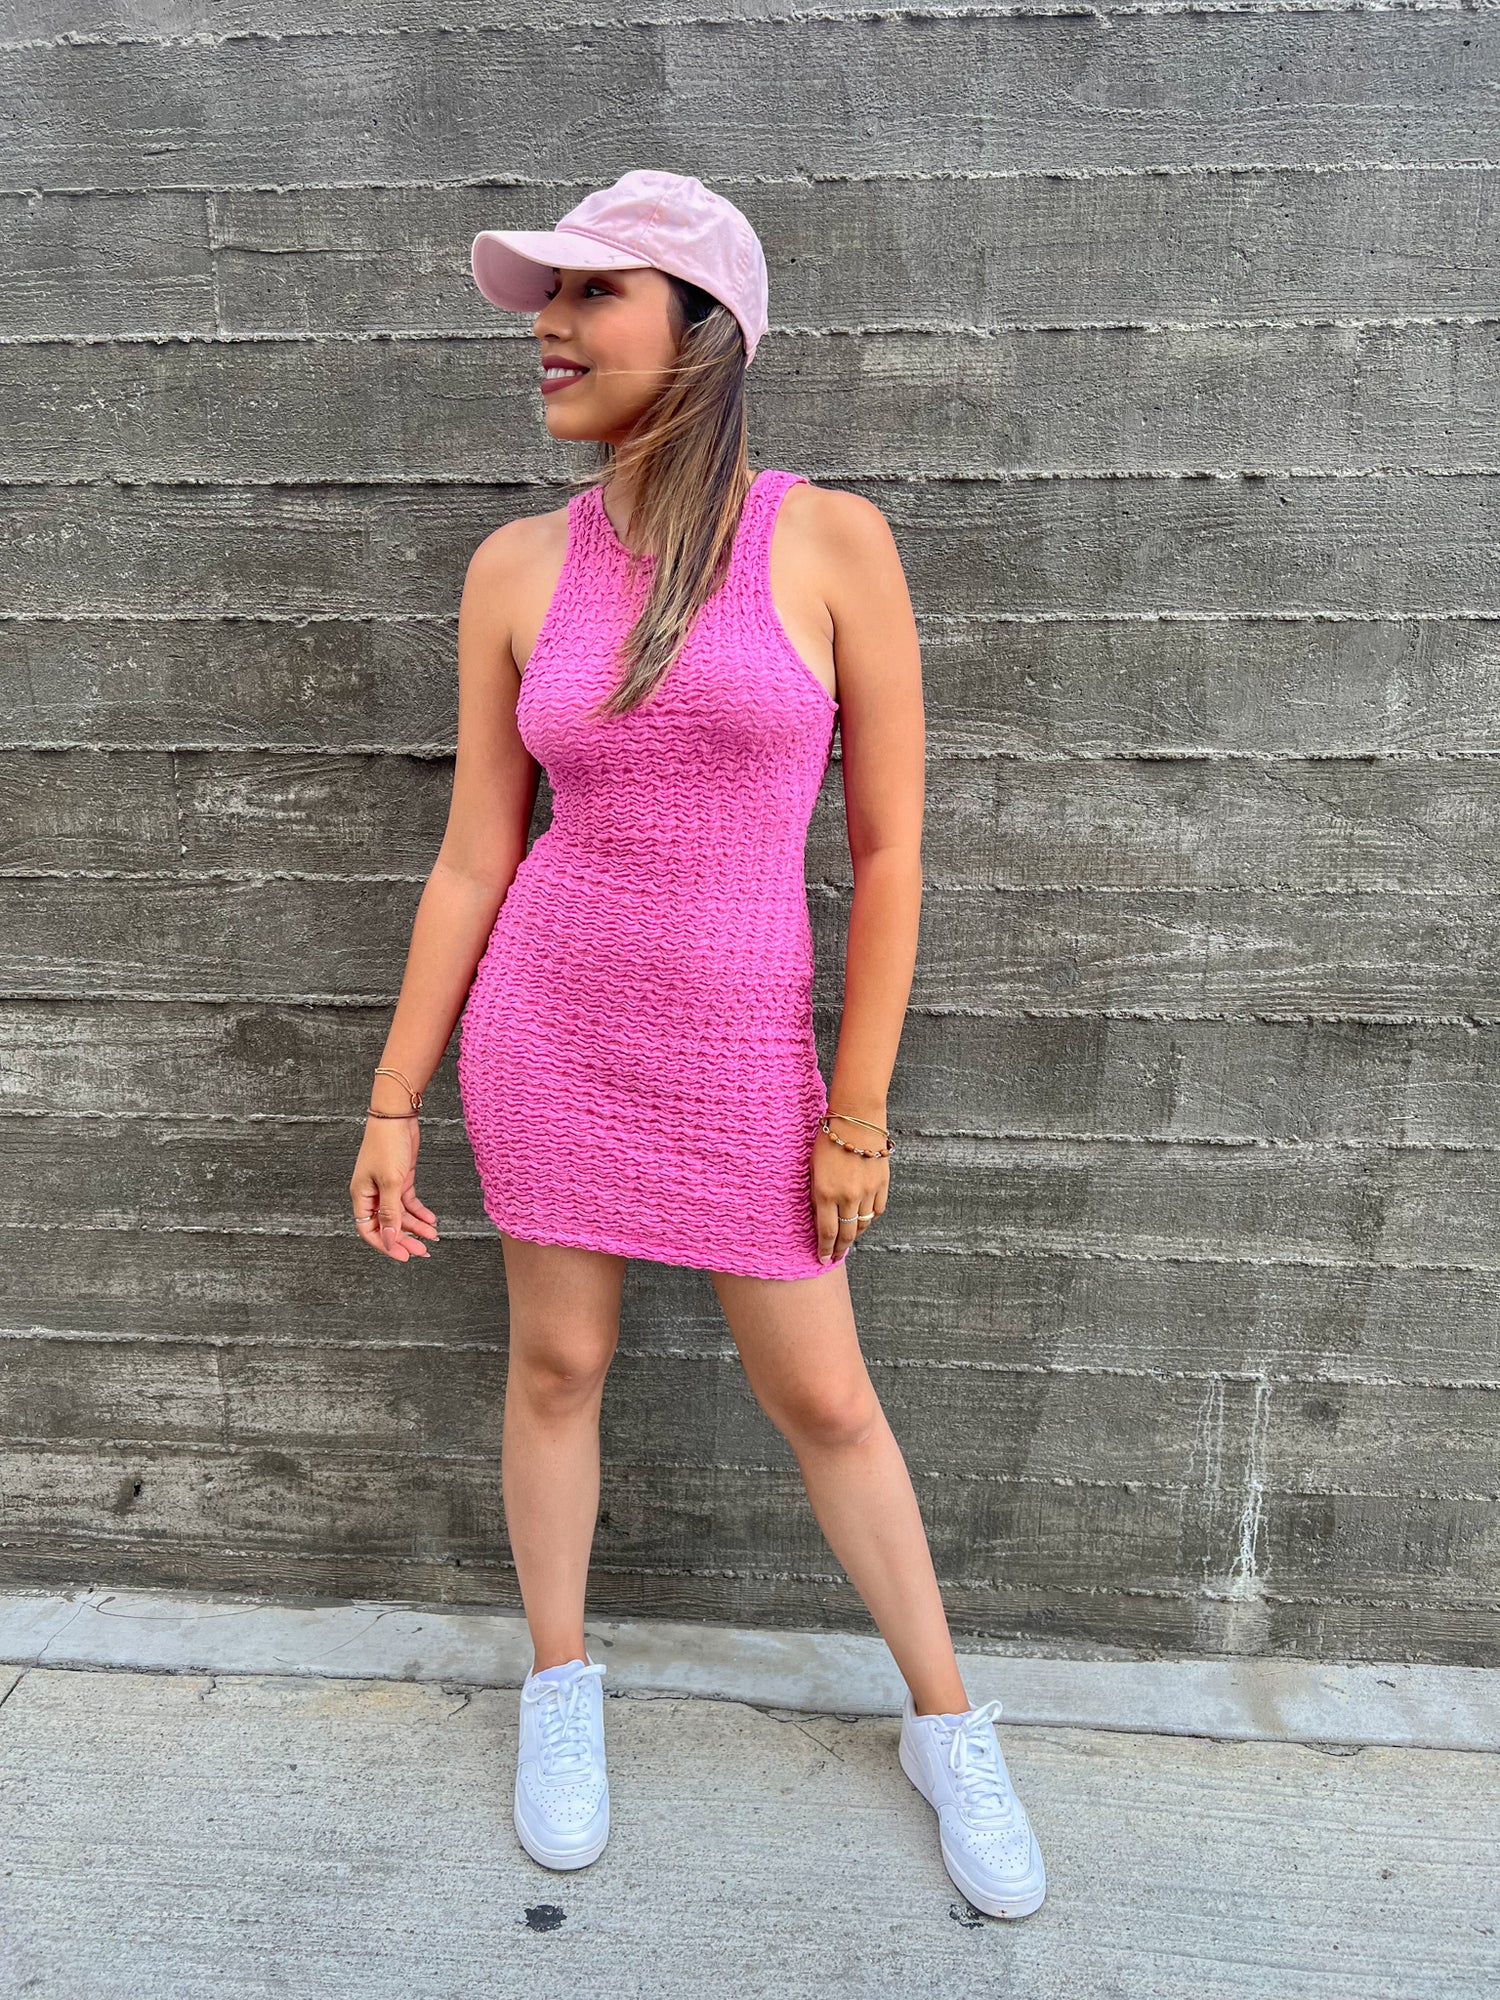 A brown skinned latina girl is standing in front of a white bricked wall. She is wearing a baby pink sleeveless short dress. She is pairing it with a pink baseball cap and white nike air force ones. Her accessory on her arm is a hot pink rectangle purse.